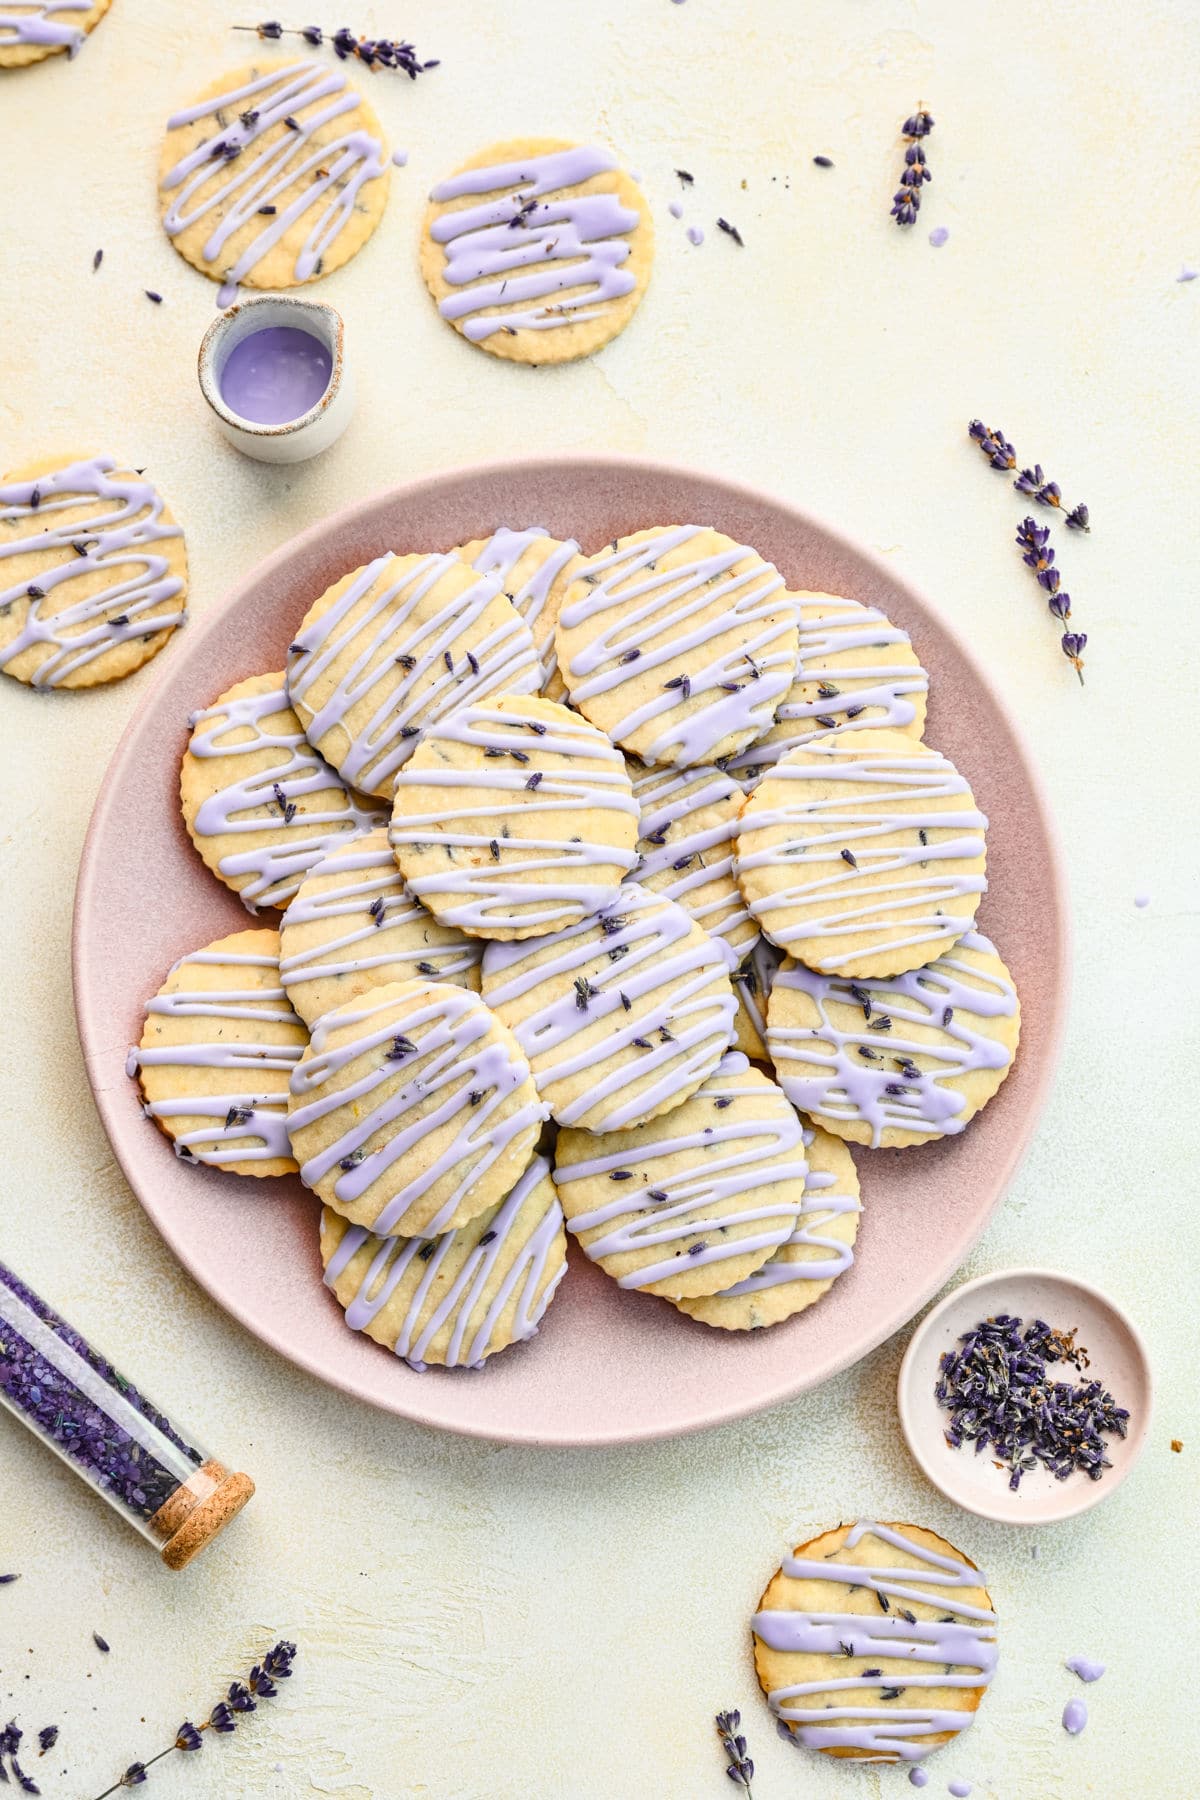 A plate of lavender cookies with lavender in a dish next to it.